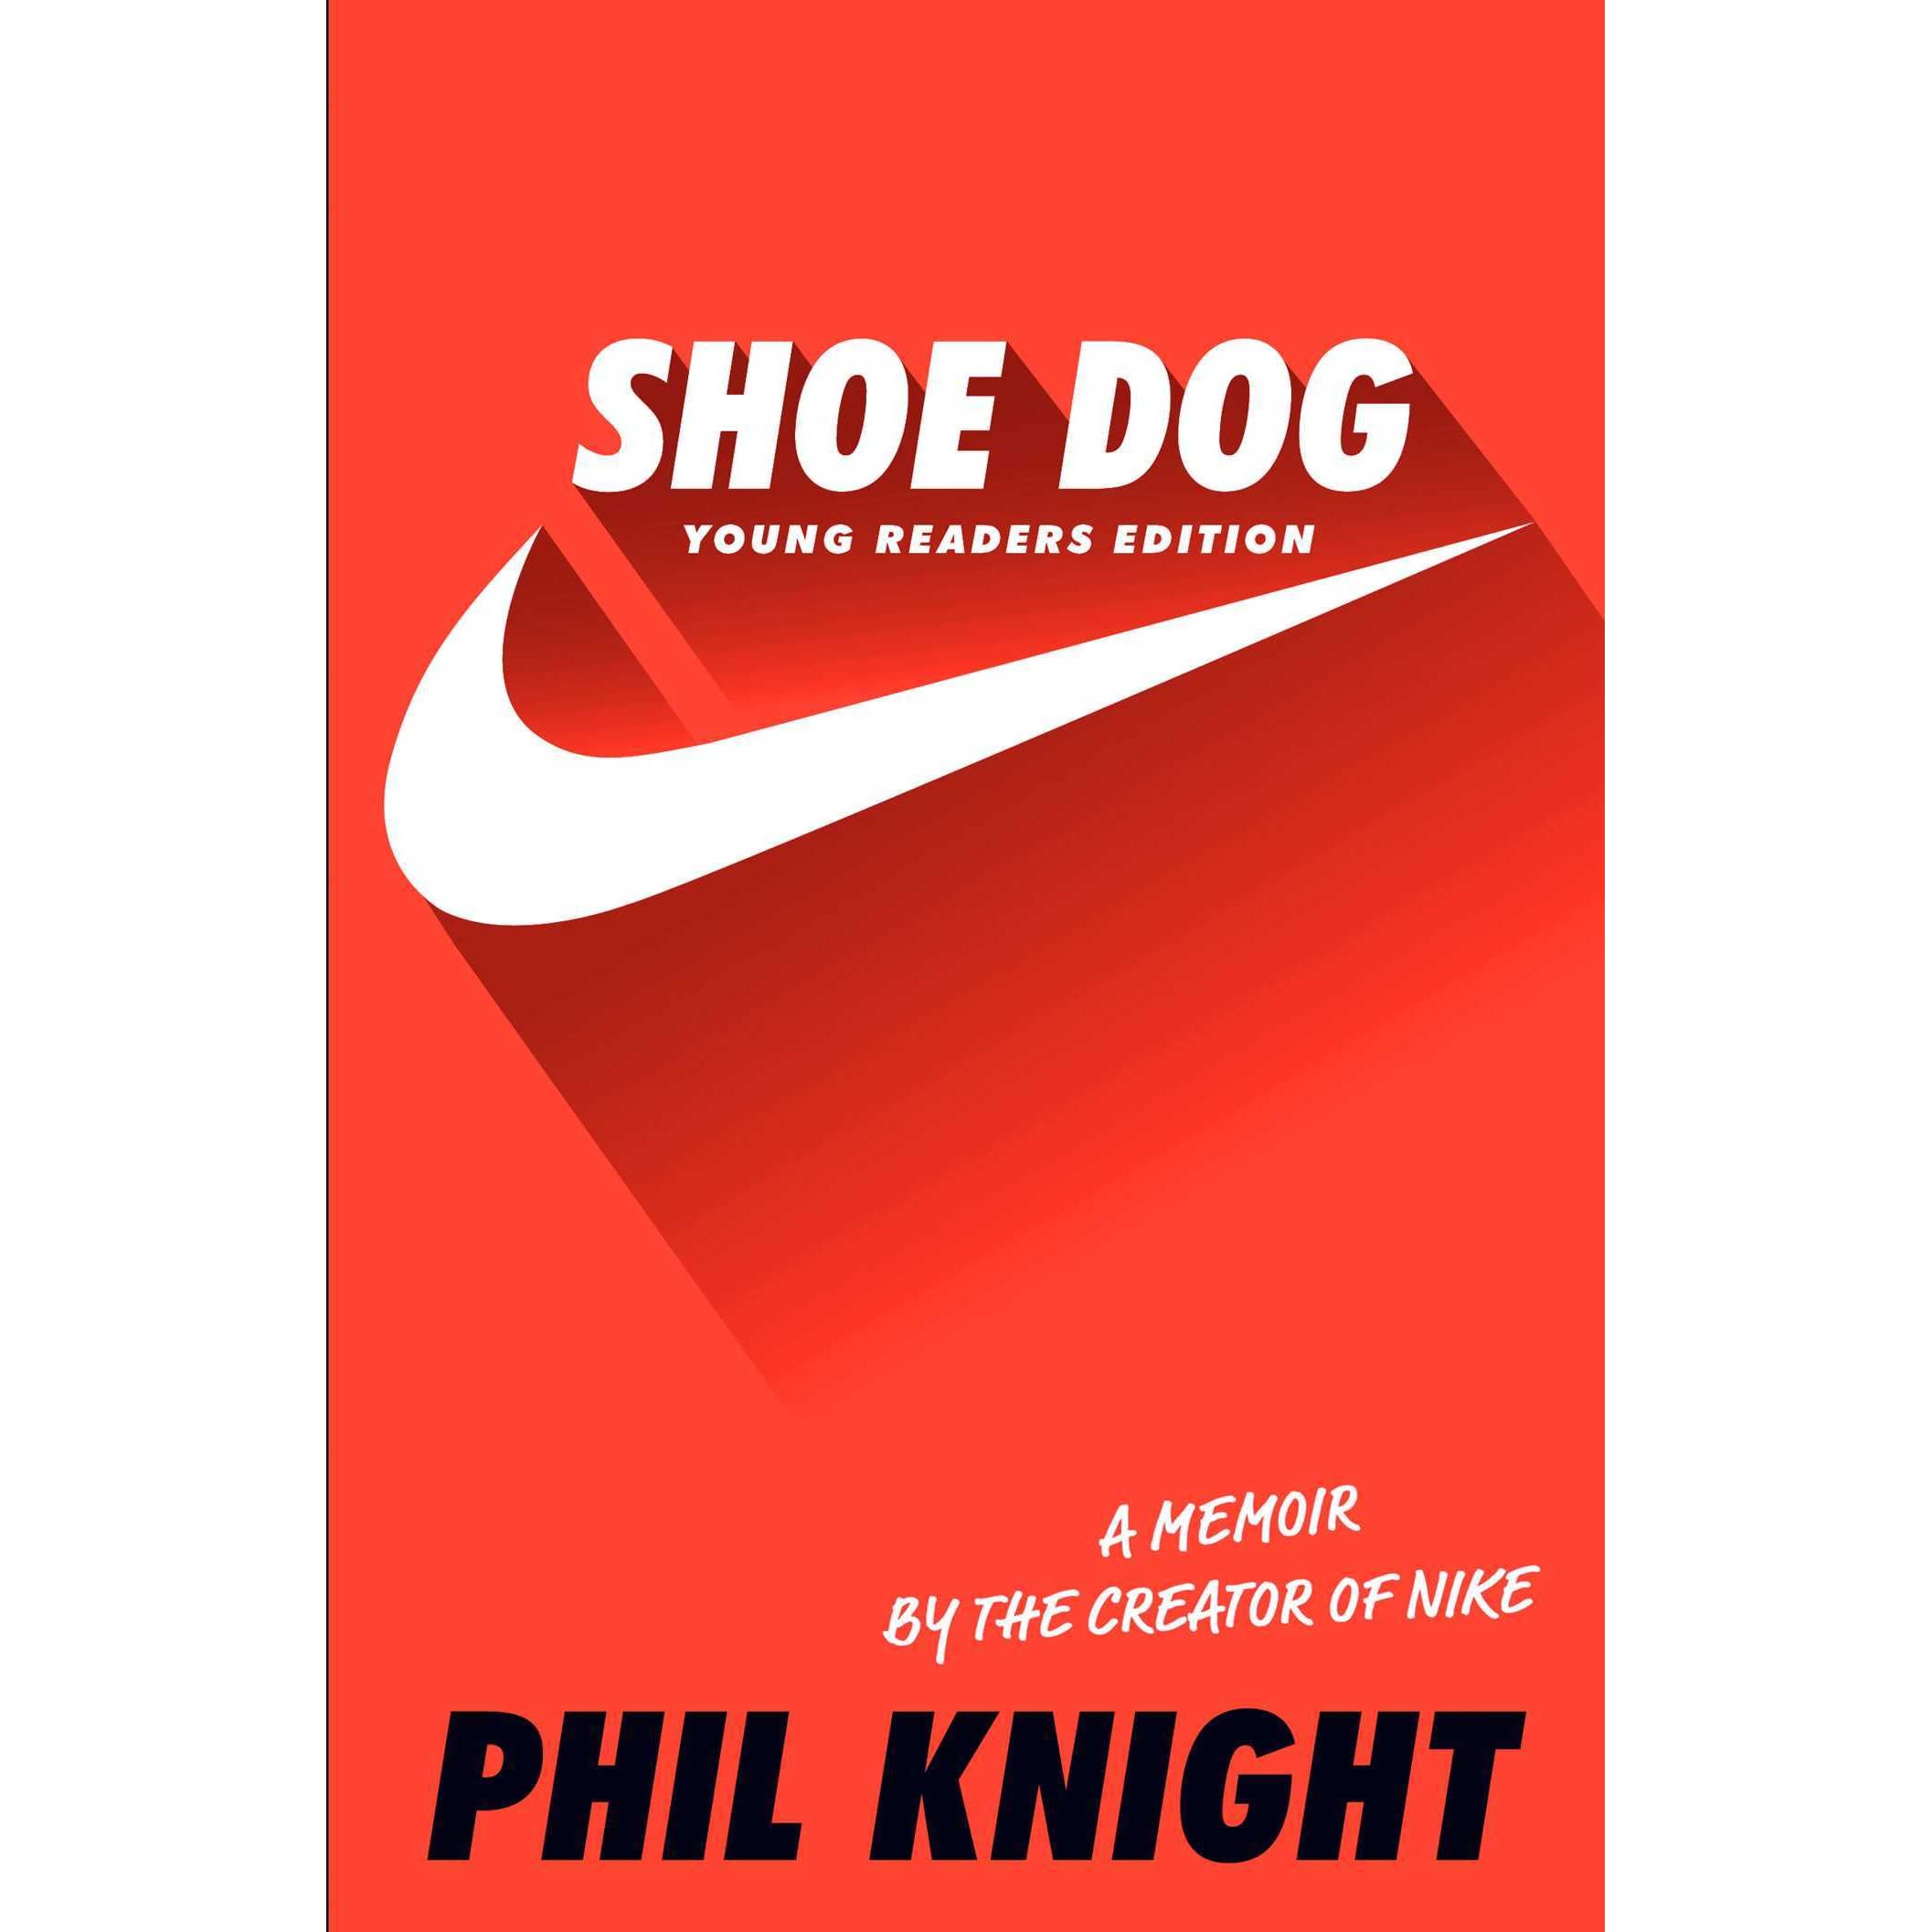 Shoe Dog: Young Readers Edition by Phil Knight